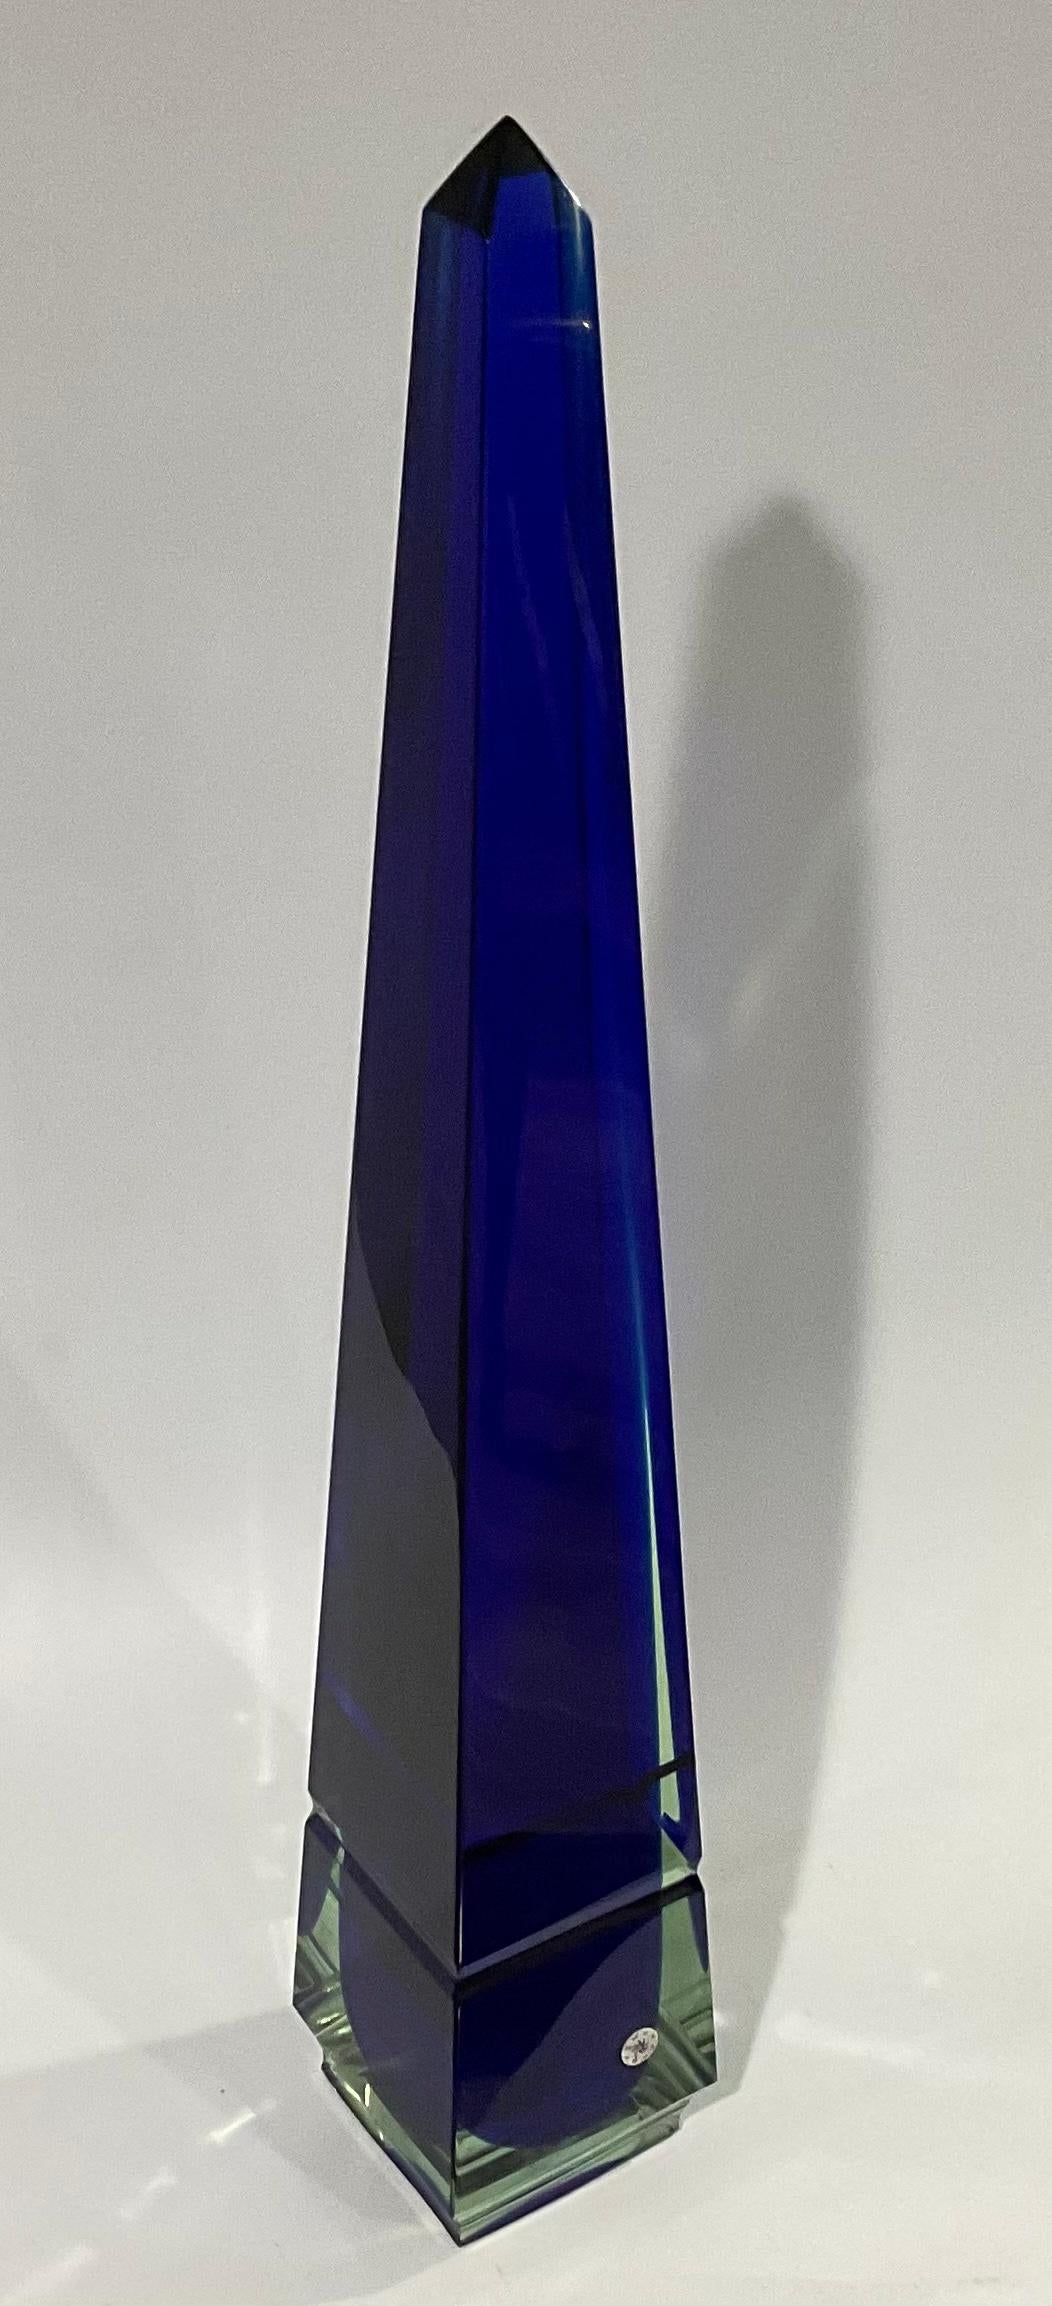 Large attributed Archimede Seguso Murano glass Sommerso obelisk sculpture circa 1960’s in vibrant blue. Beautiful design and very large and impressive size.